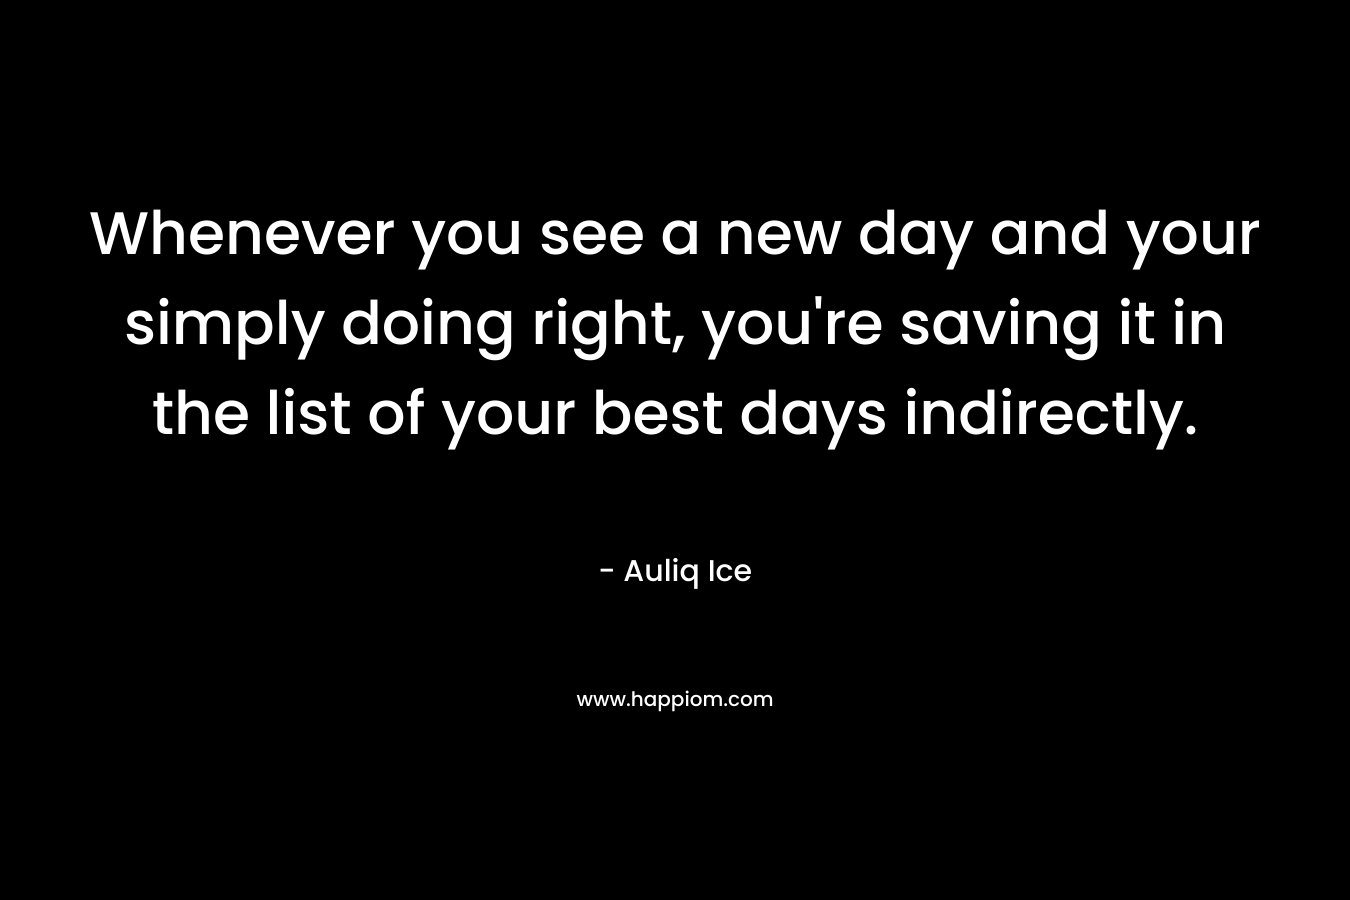 Whenever you see a new day and your simply doing right, you’re saving it in the list of your best days indirectly. – Auliq Ice